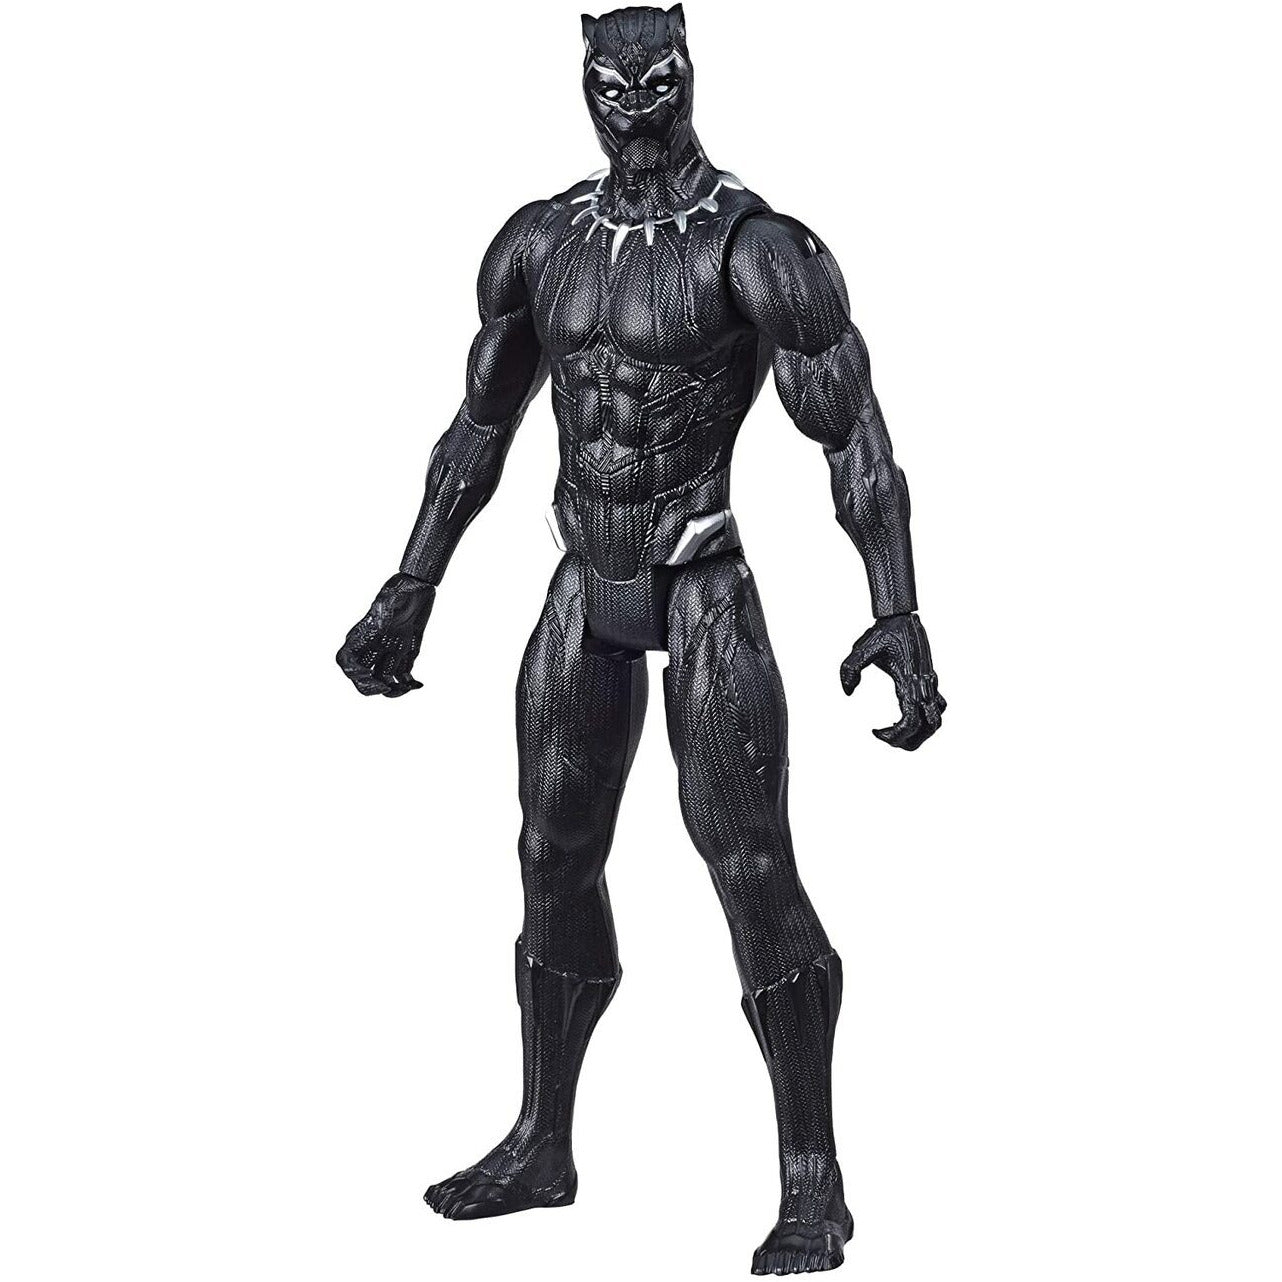 Marvel Avengers Titan Hero Series Black Panther Action Figure, 12-Inch Toy